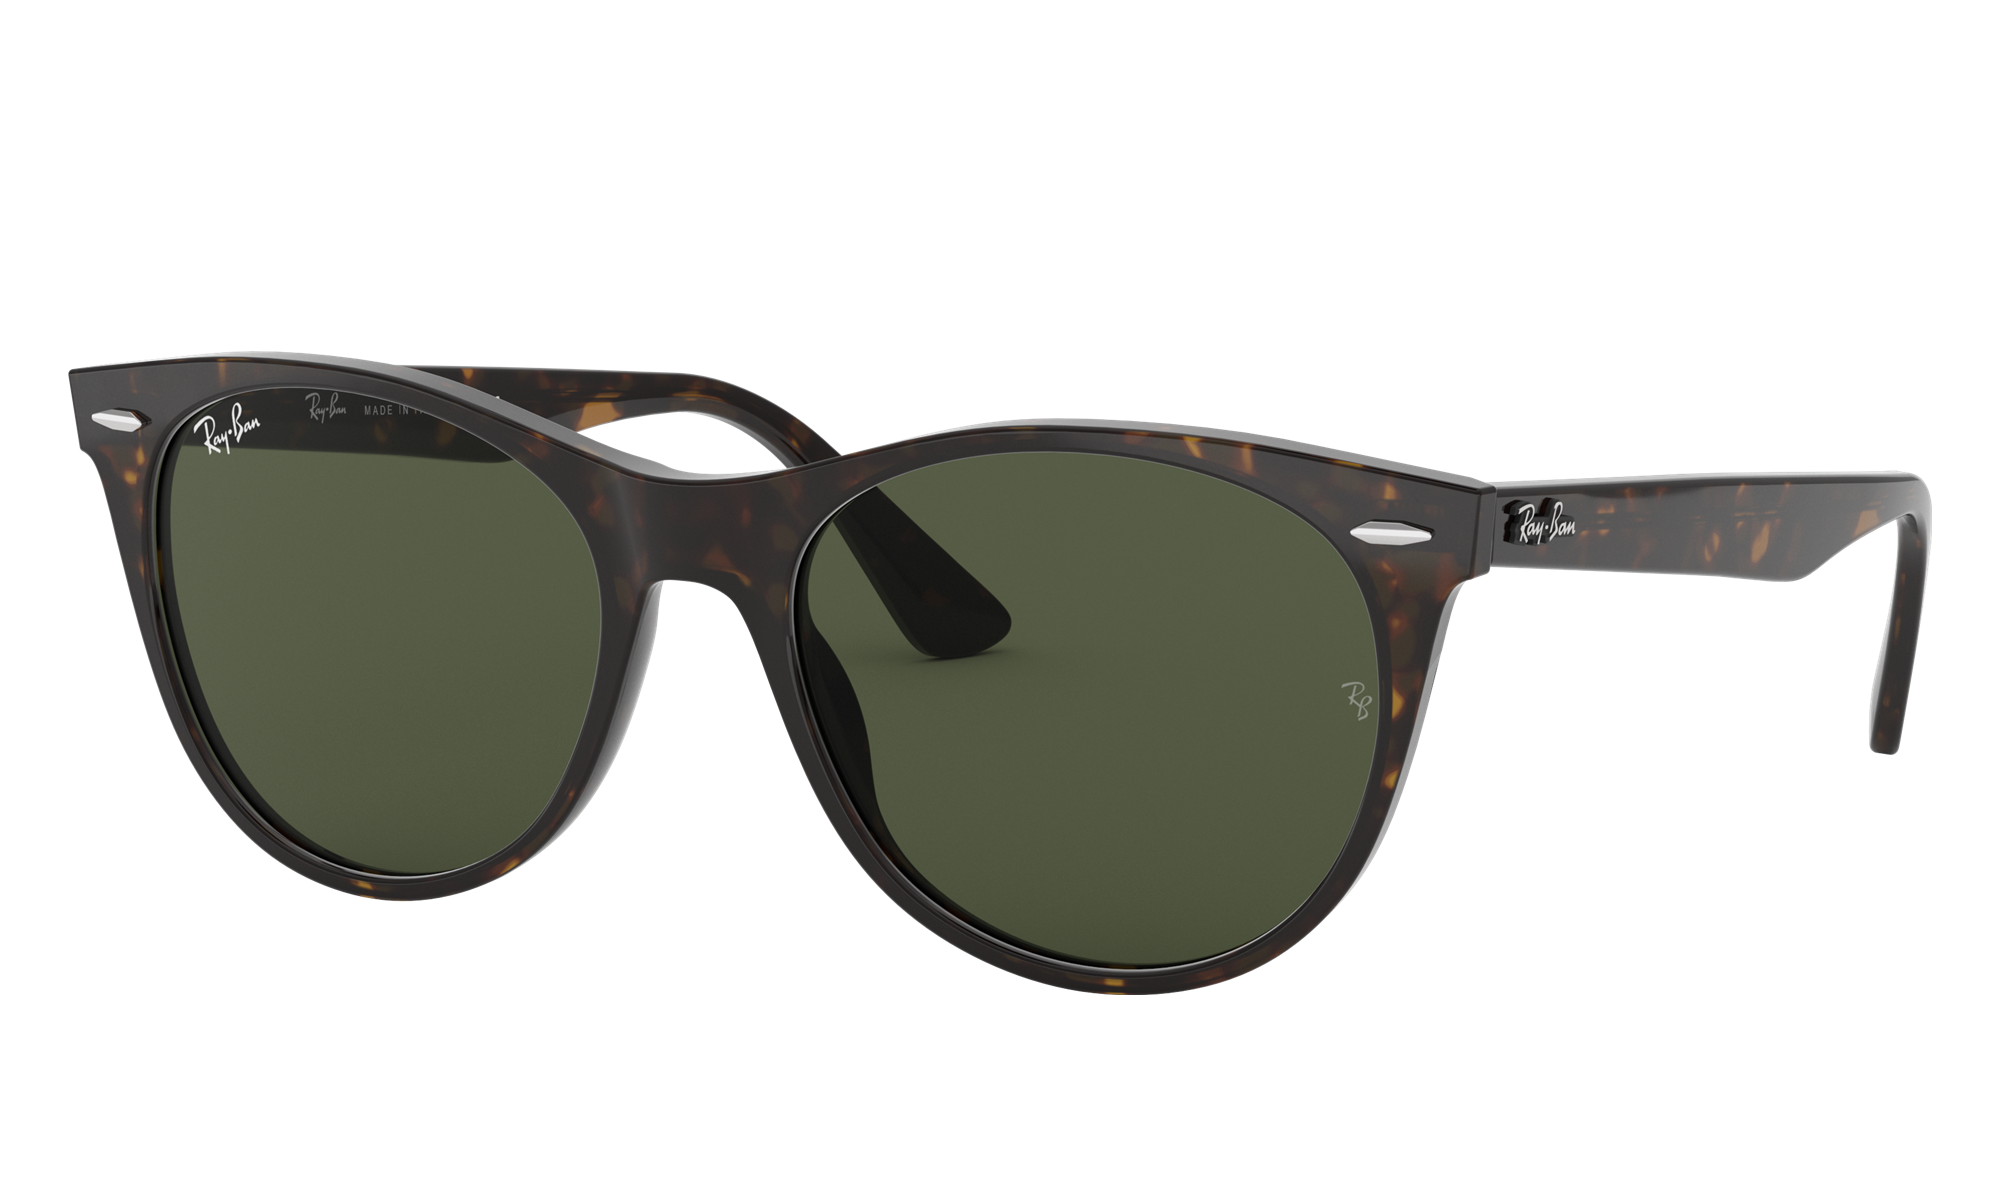 Ray-Ban Unisex Rb2185 Tortoise Size: Small